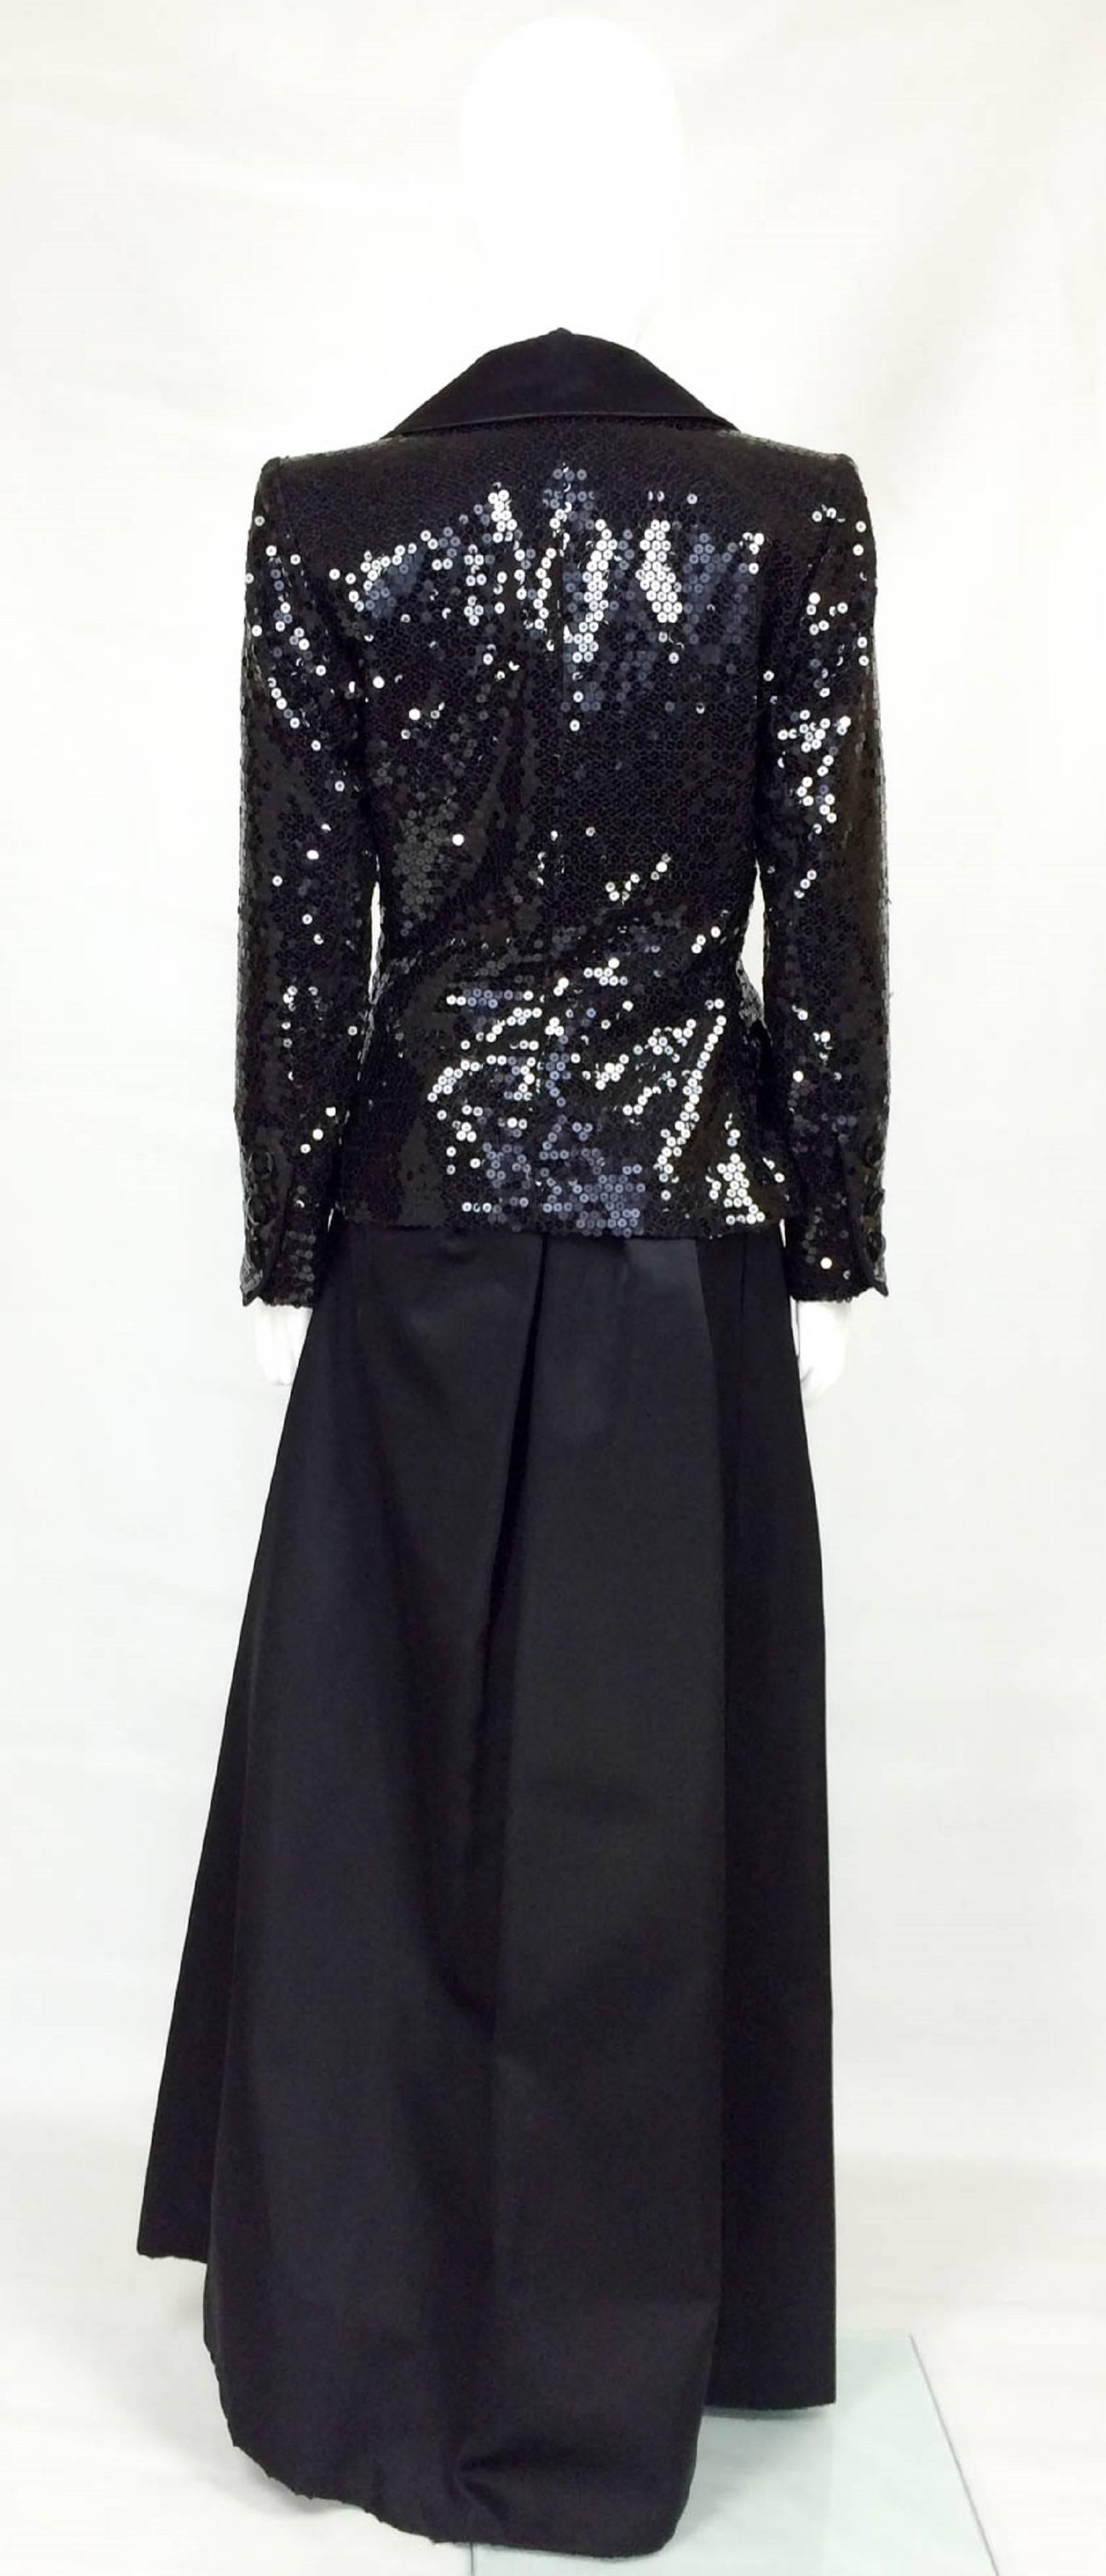 1980 Yves Saint Laurent Le Smoking Sequin Jacket, Long and Short Skirt Suit In Excellent Condition For Sale In London, Chelsea